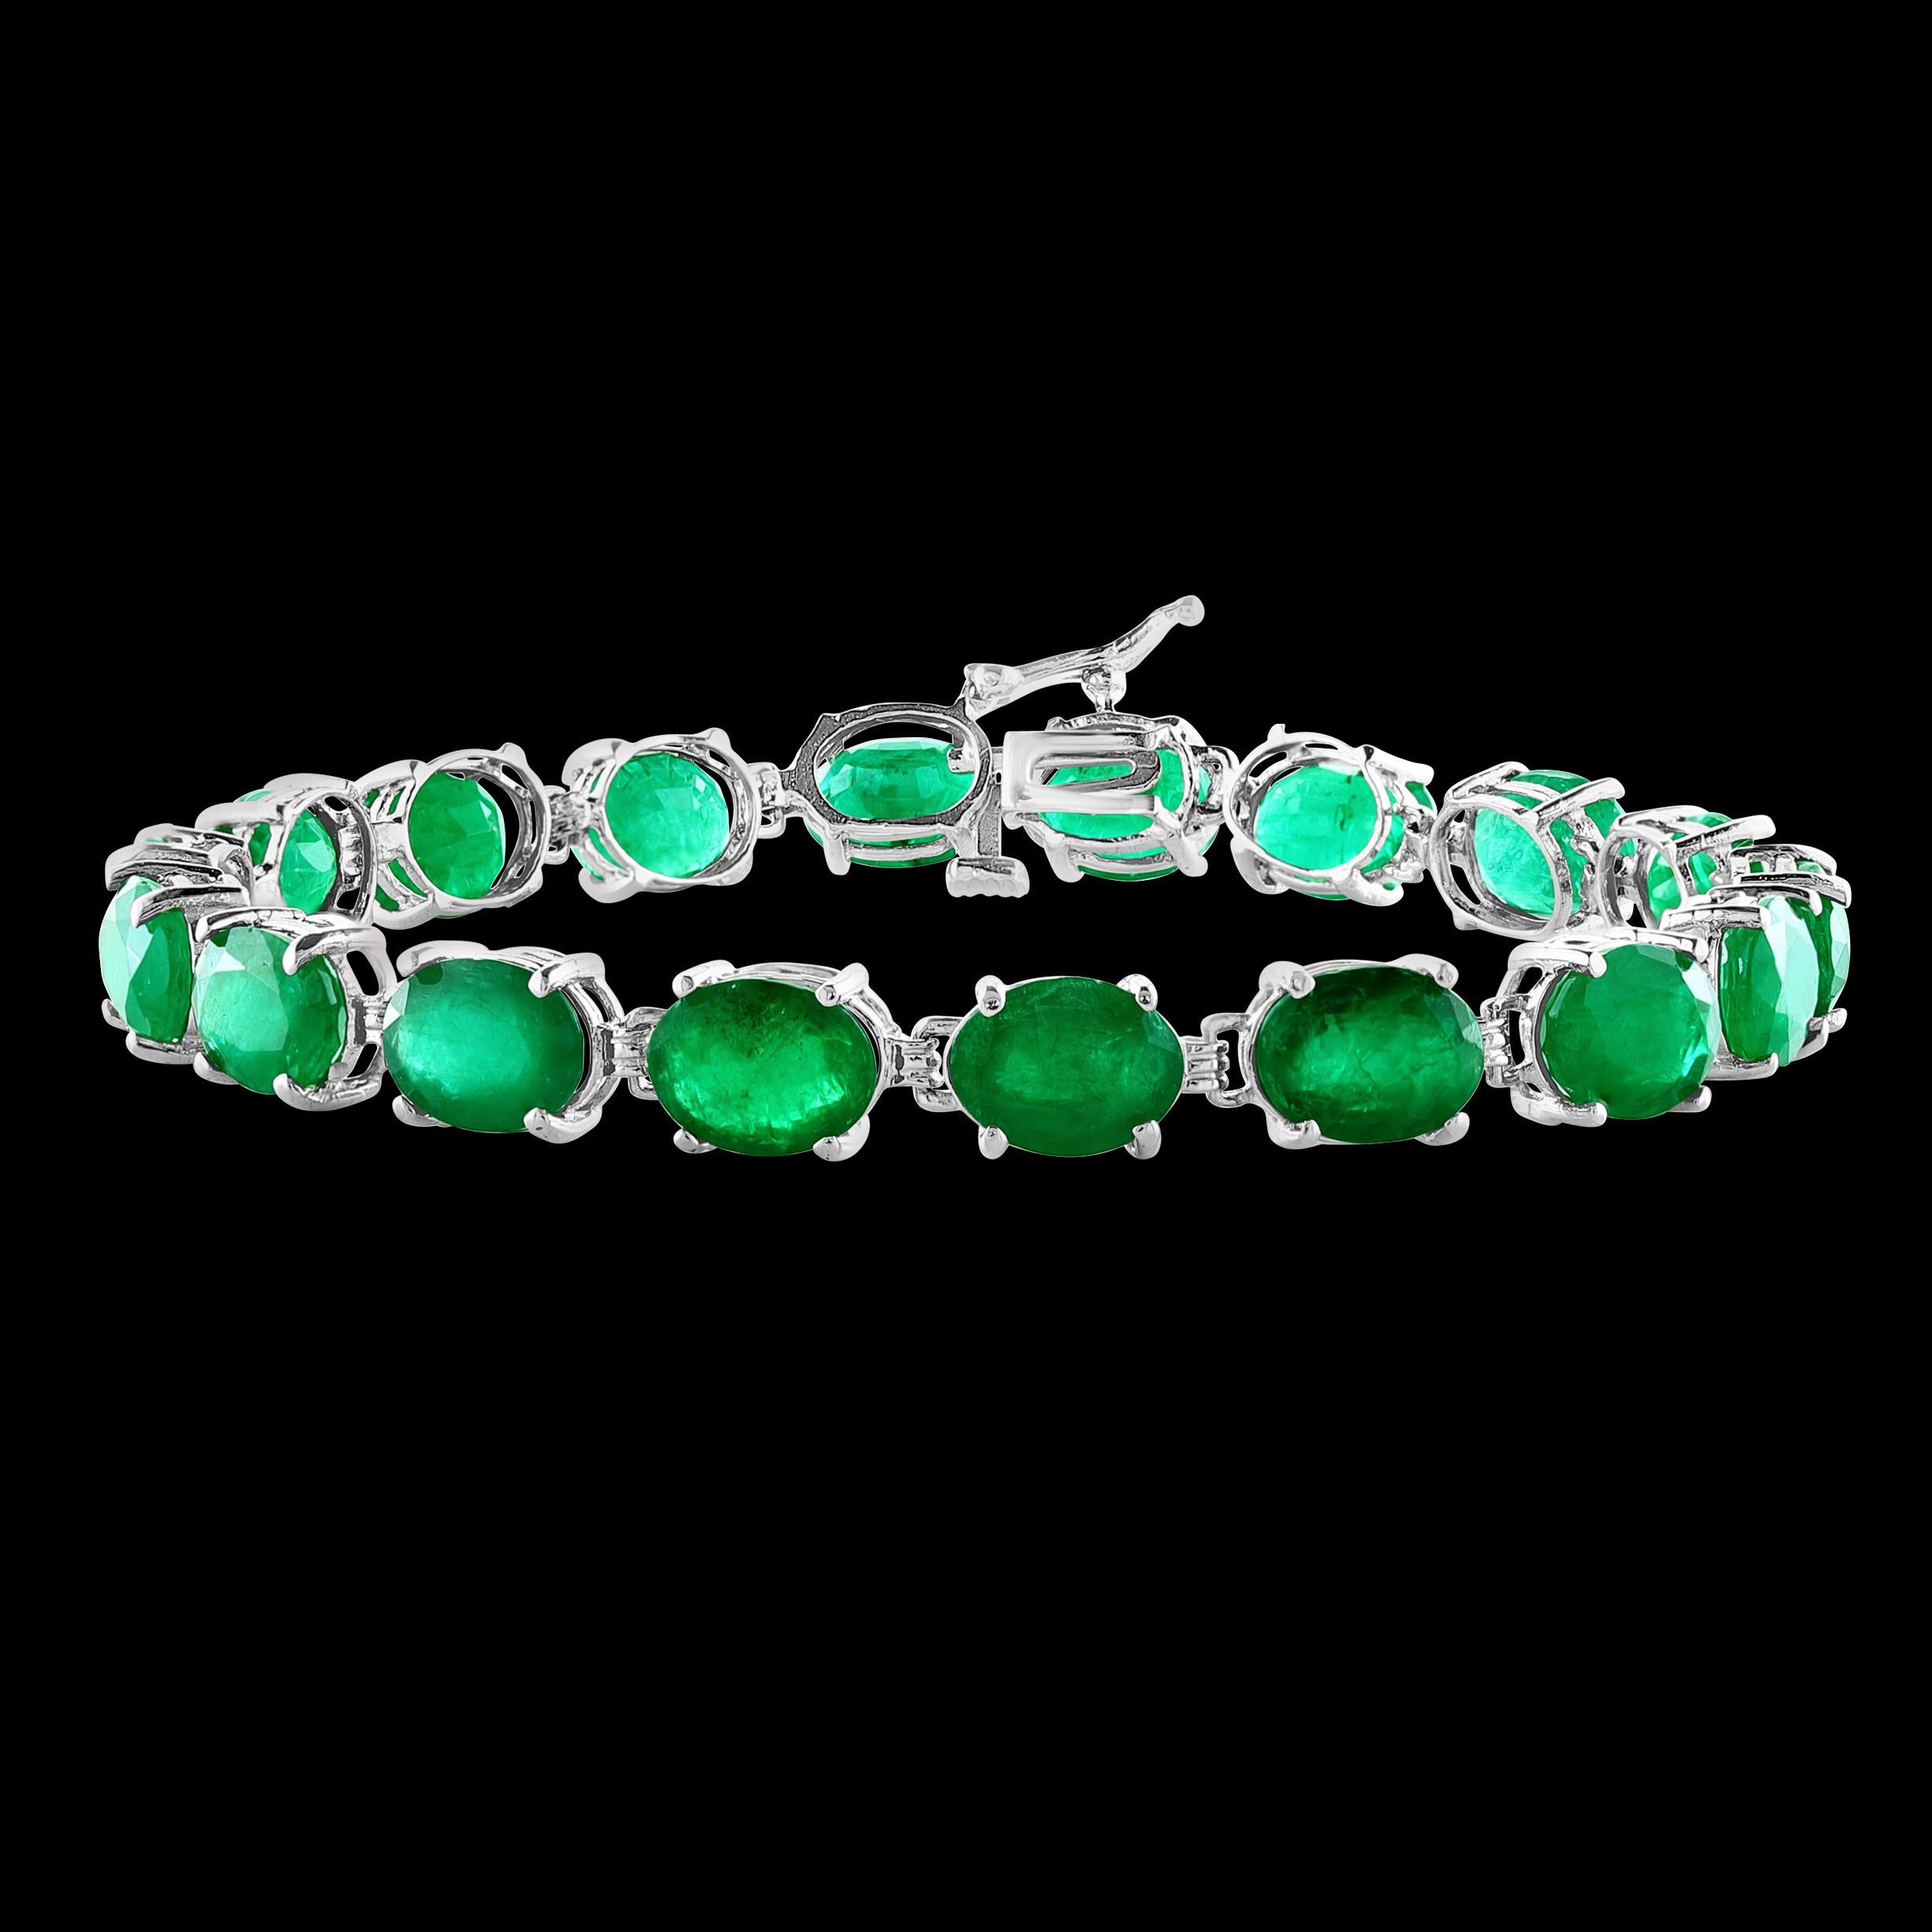  This exceptionally affordable Tennis  bracelet has  17 stones of oval  Emeralds  .  Total weight of the Emeralds is  approximately 23 carat. 
The bracelet is expertly crafted with 12.21  grams of  14 karat White  gold . Have a safety clasp